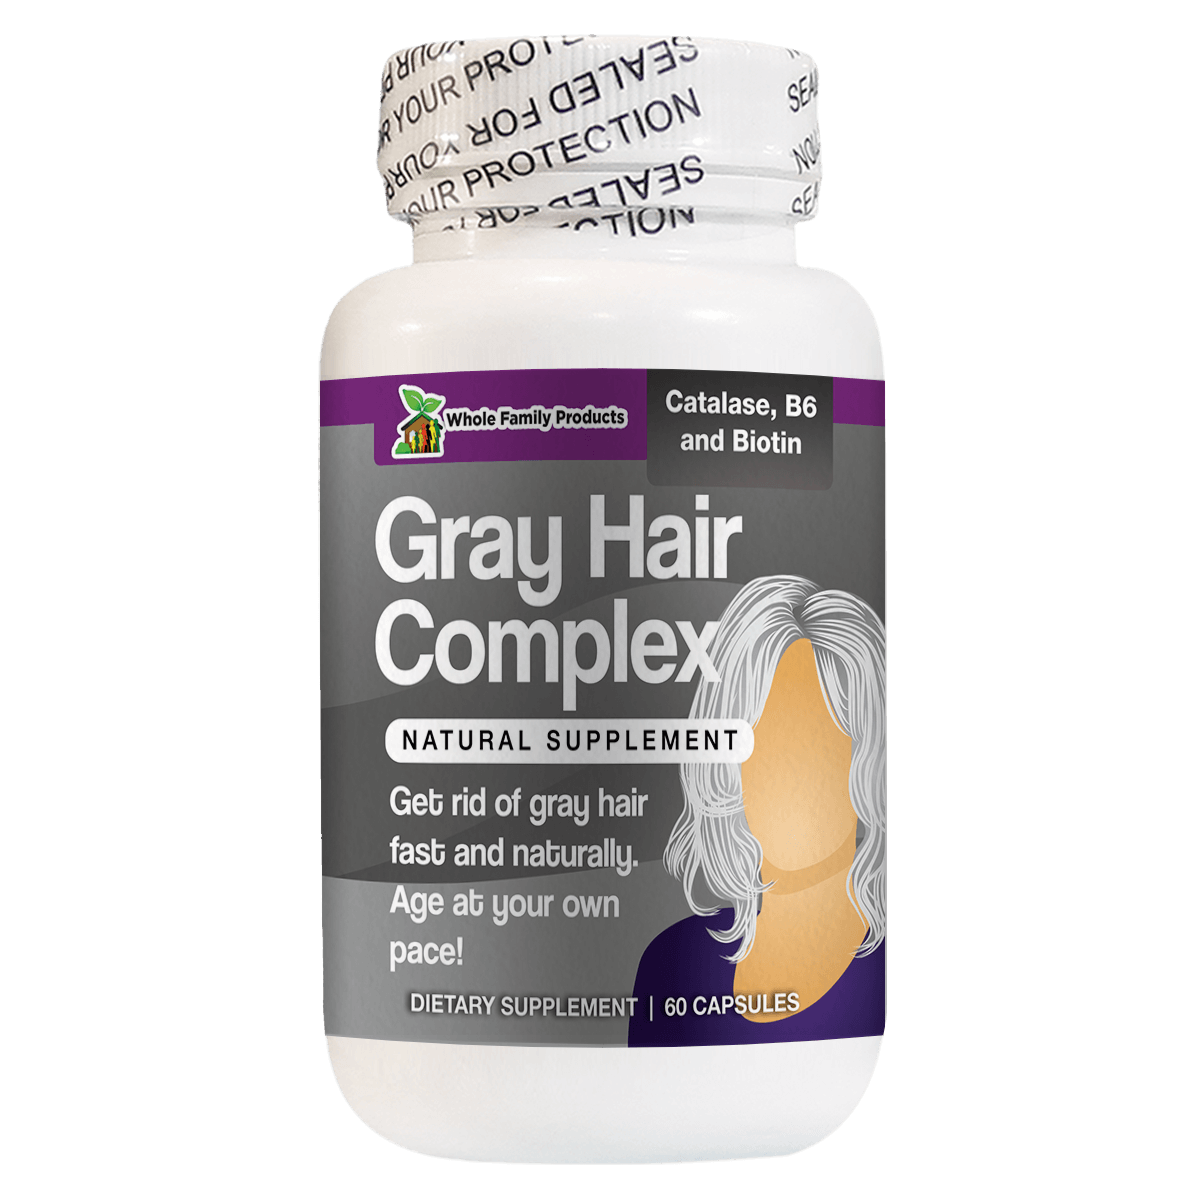 Gray Hair Complex Natural Supplement to Get Rid of Gray Hair